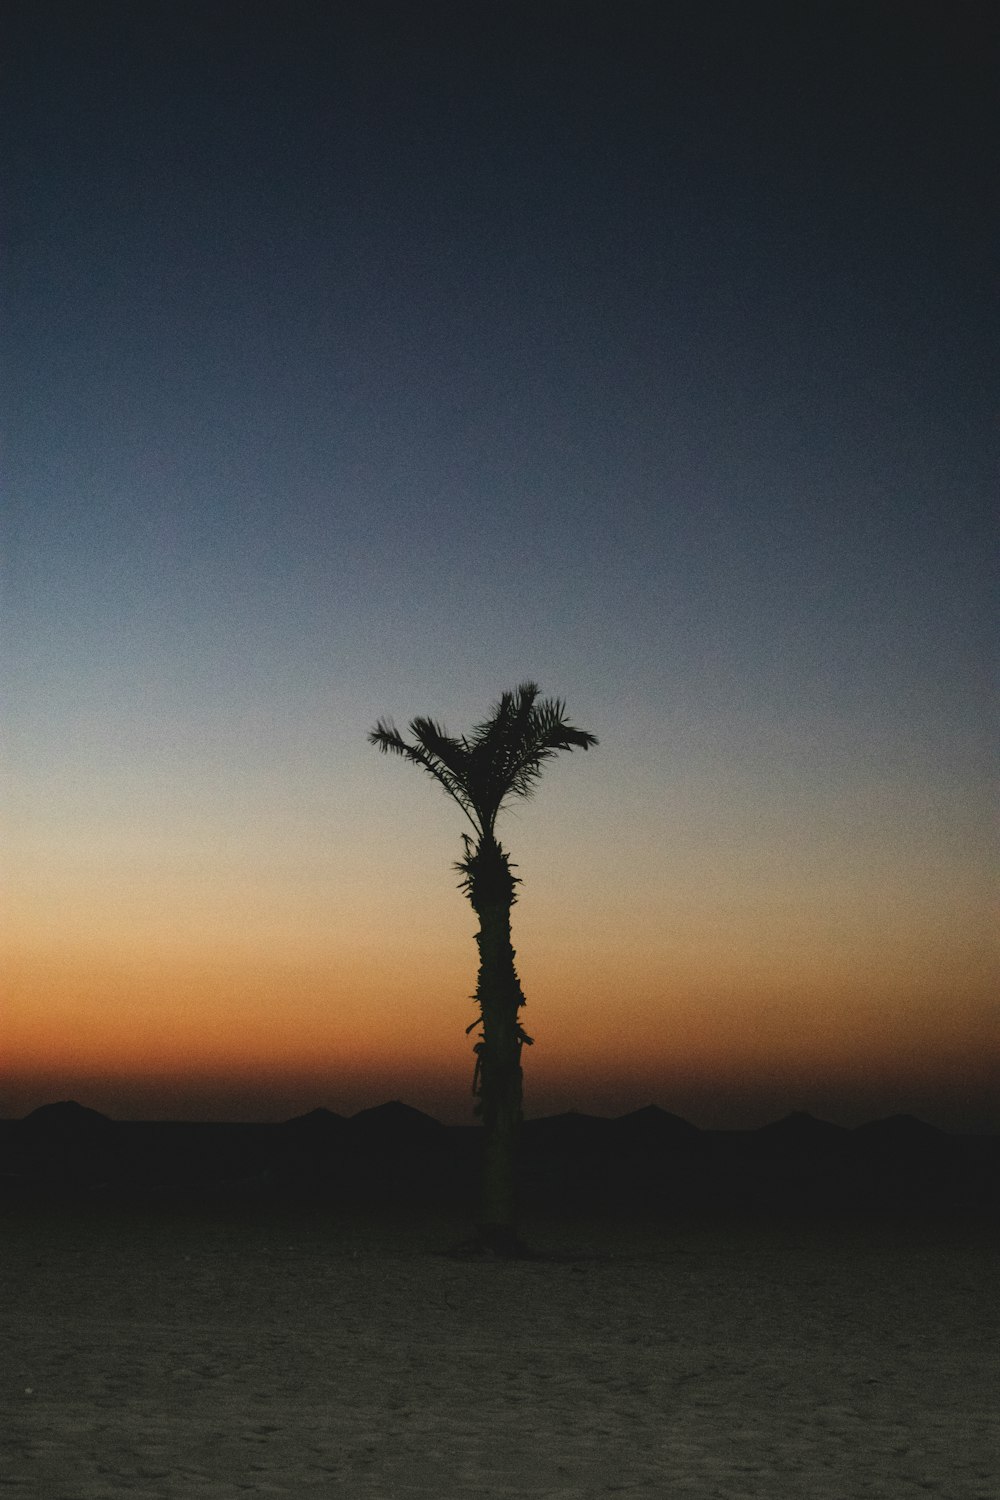 a palm tree in the middle of a desert